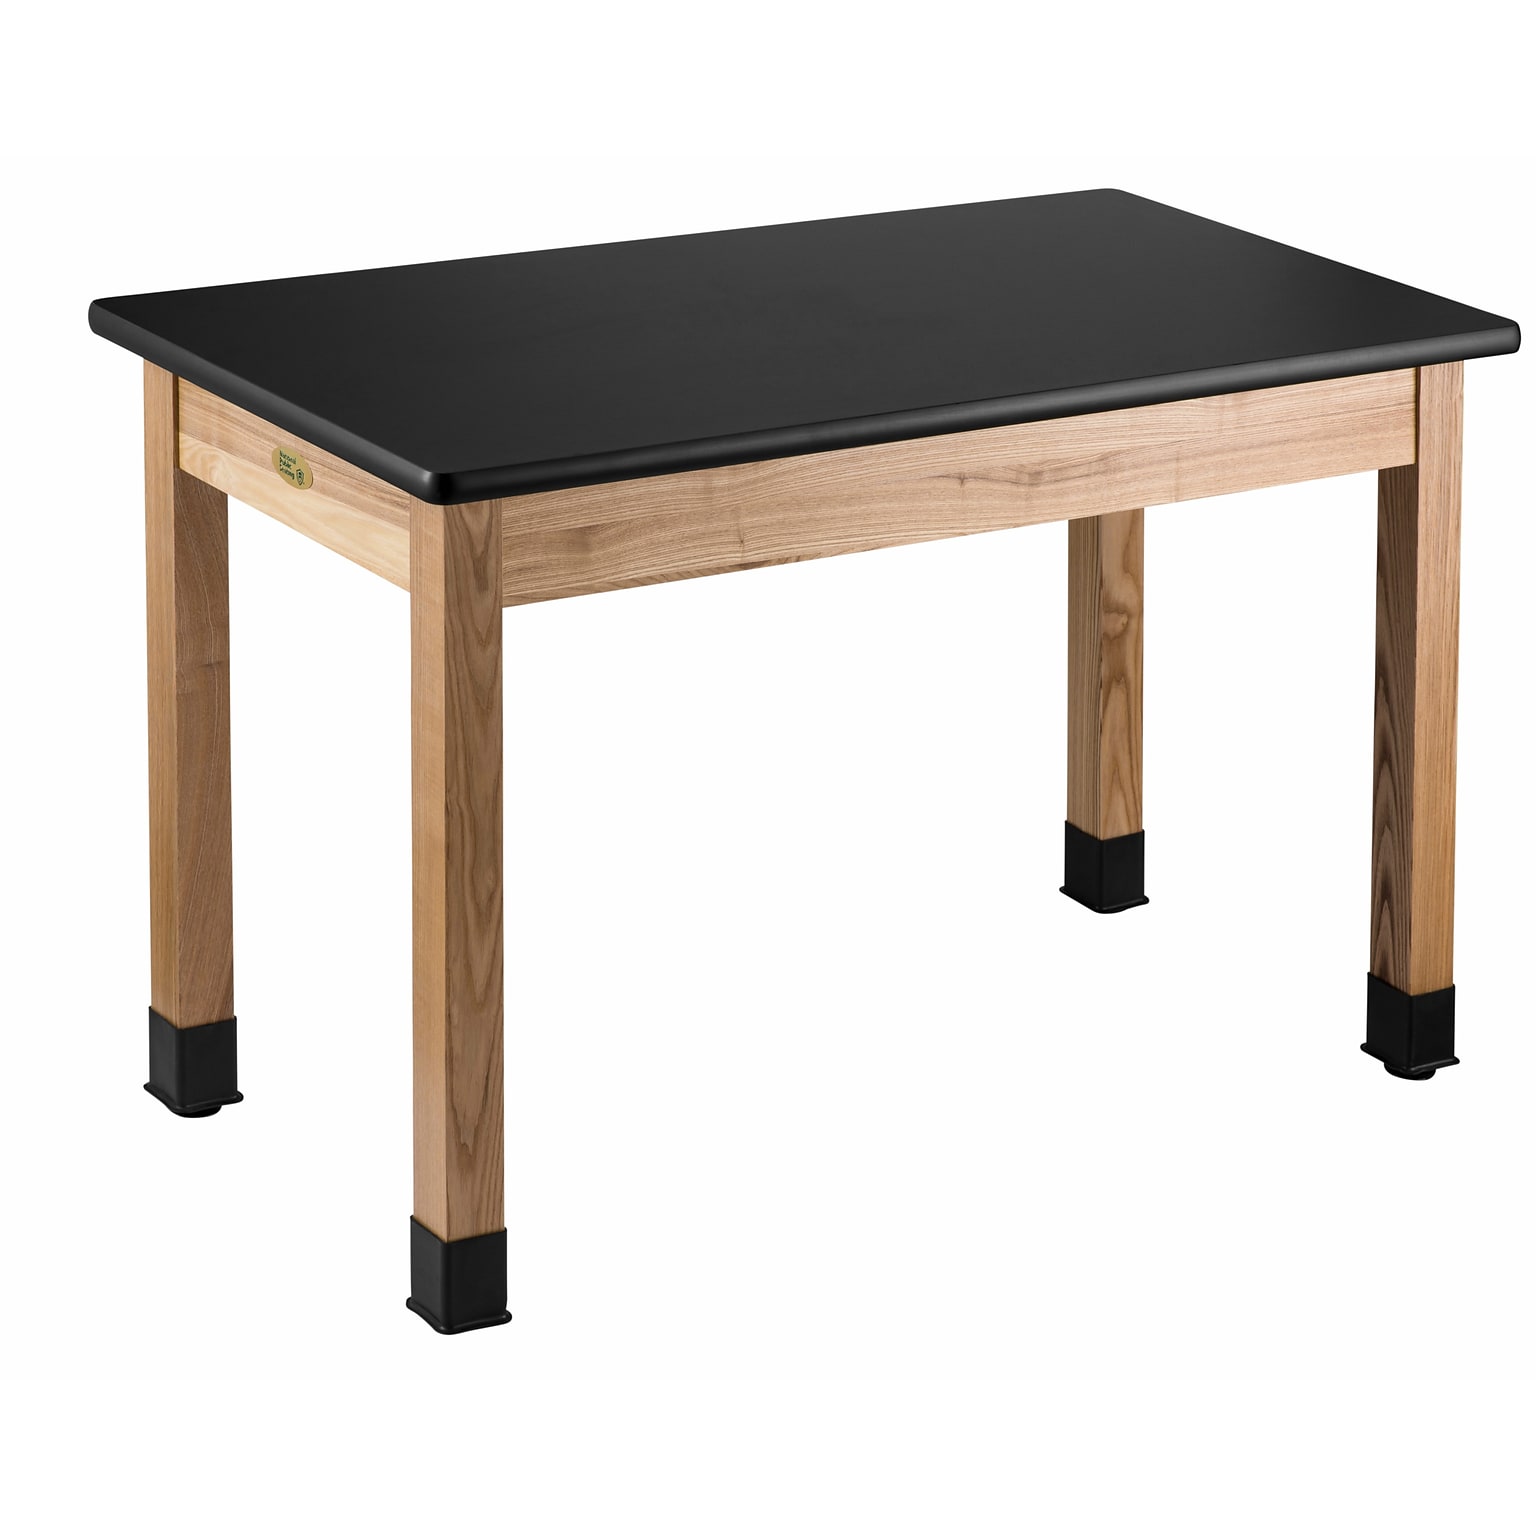 National Public Seating Wood Science Table, Chemical Resistant Series, 24 x 72, Height Adjustable, Black/Ashwood (SLT1-2472C)